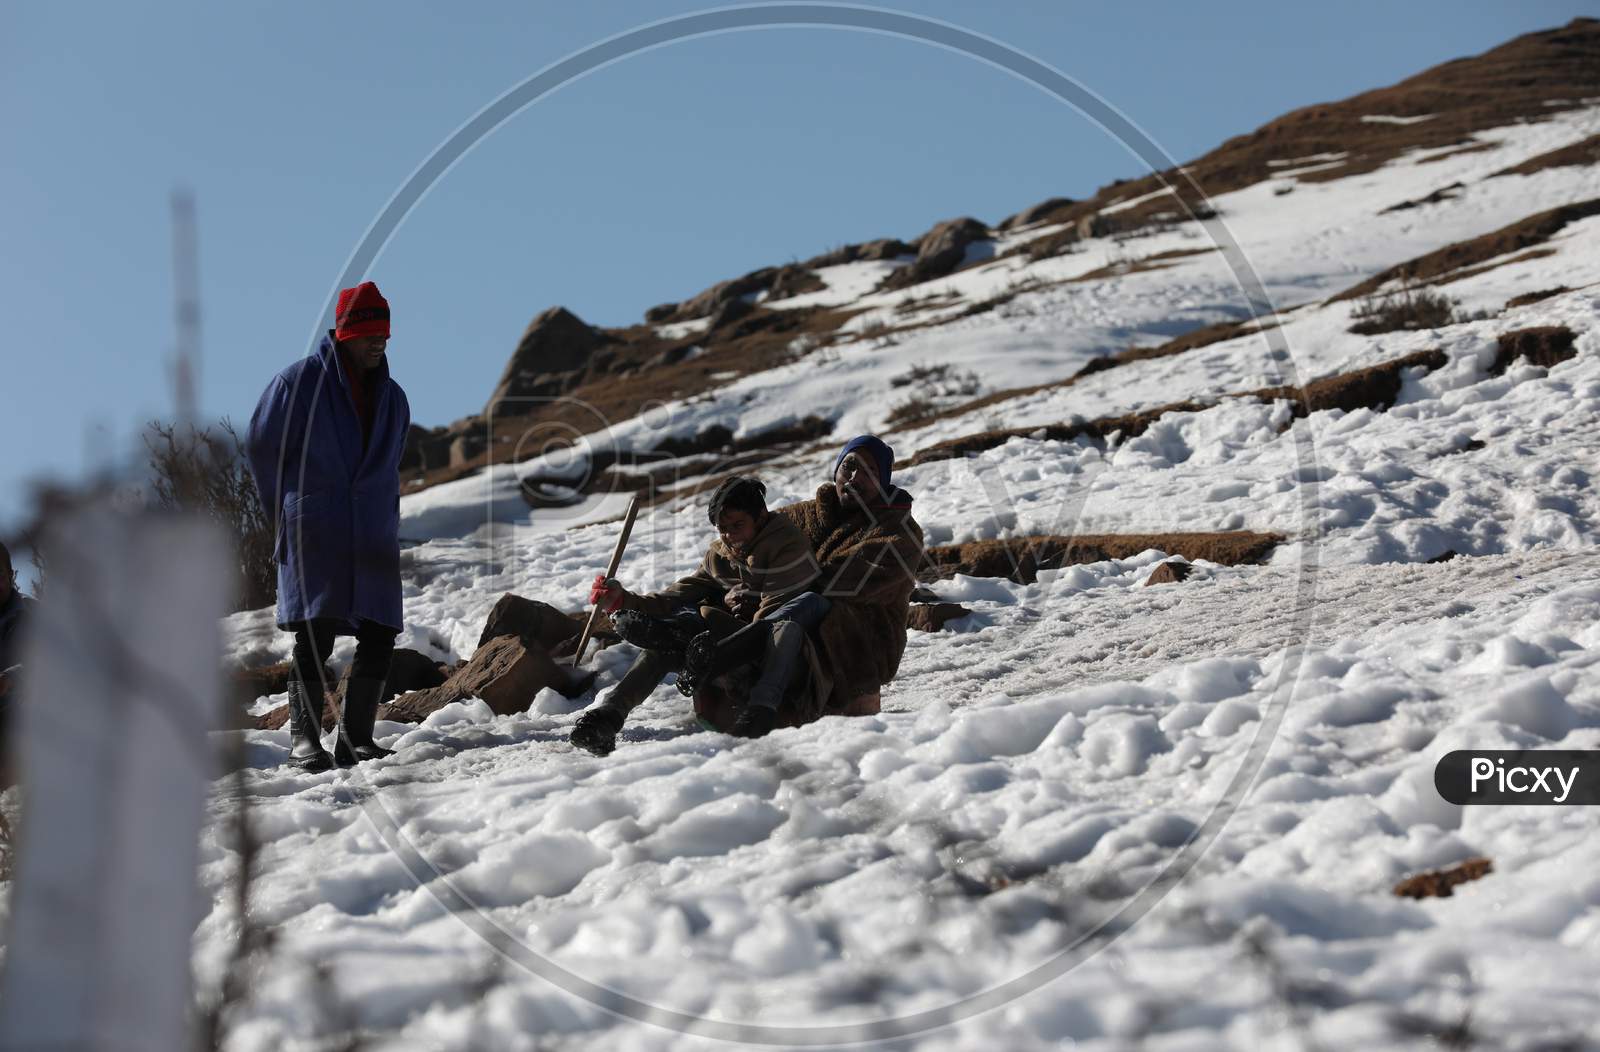 Tourist Play Snow Cart Drive At Nathatop About 110 Km From Jammu On Sunday10 Jan,2021.